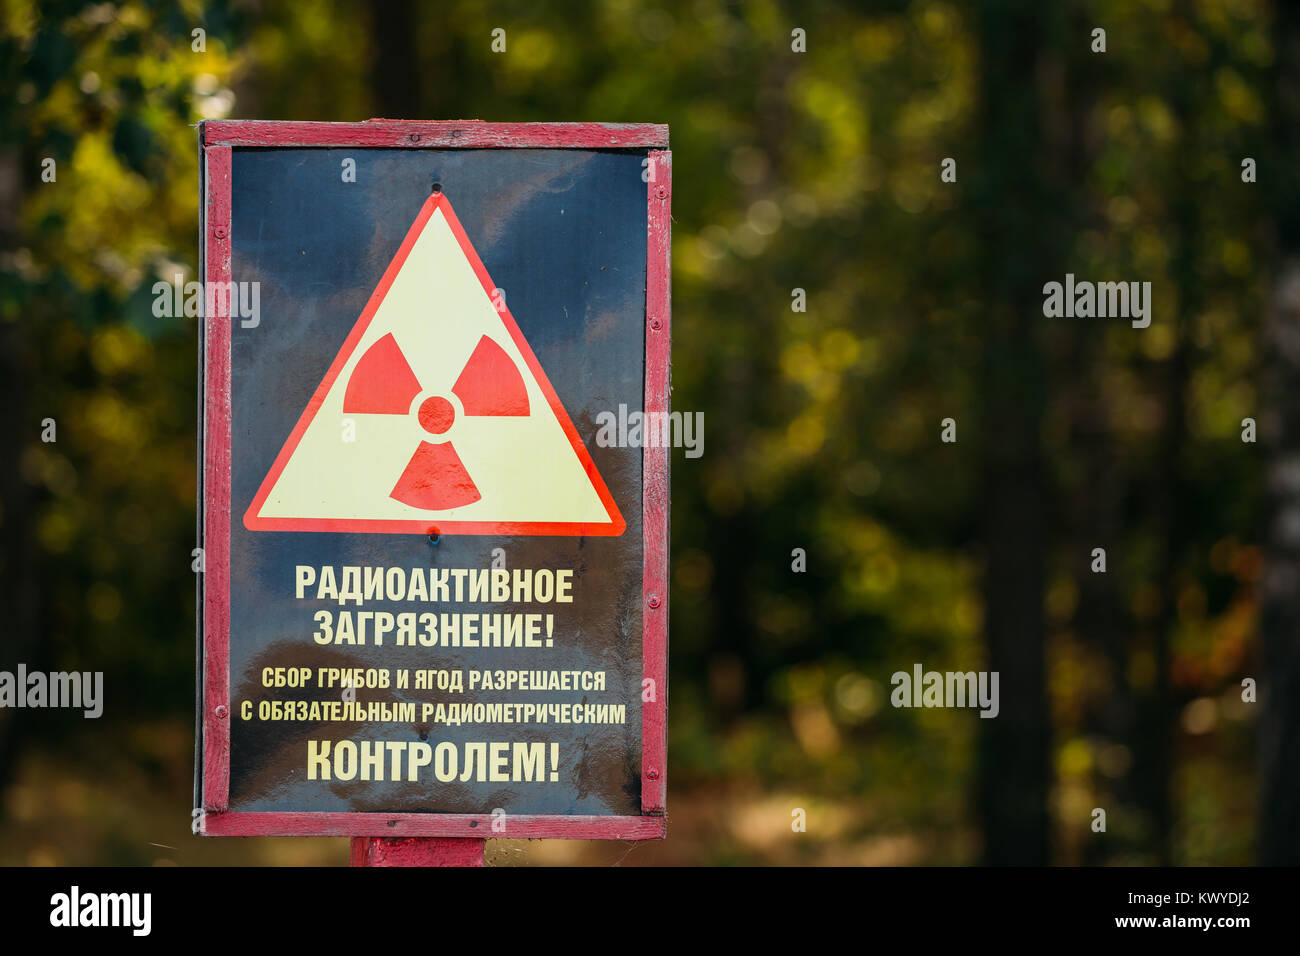 Sign At The Entrance To Forest Warning About Radioactive Contamination And Ban Of Picking Mushrooms And Berries. Stock Photo